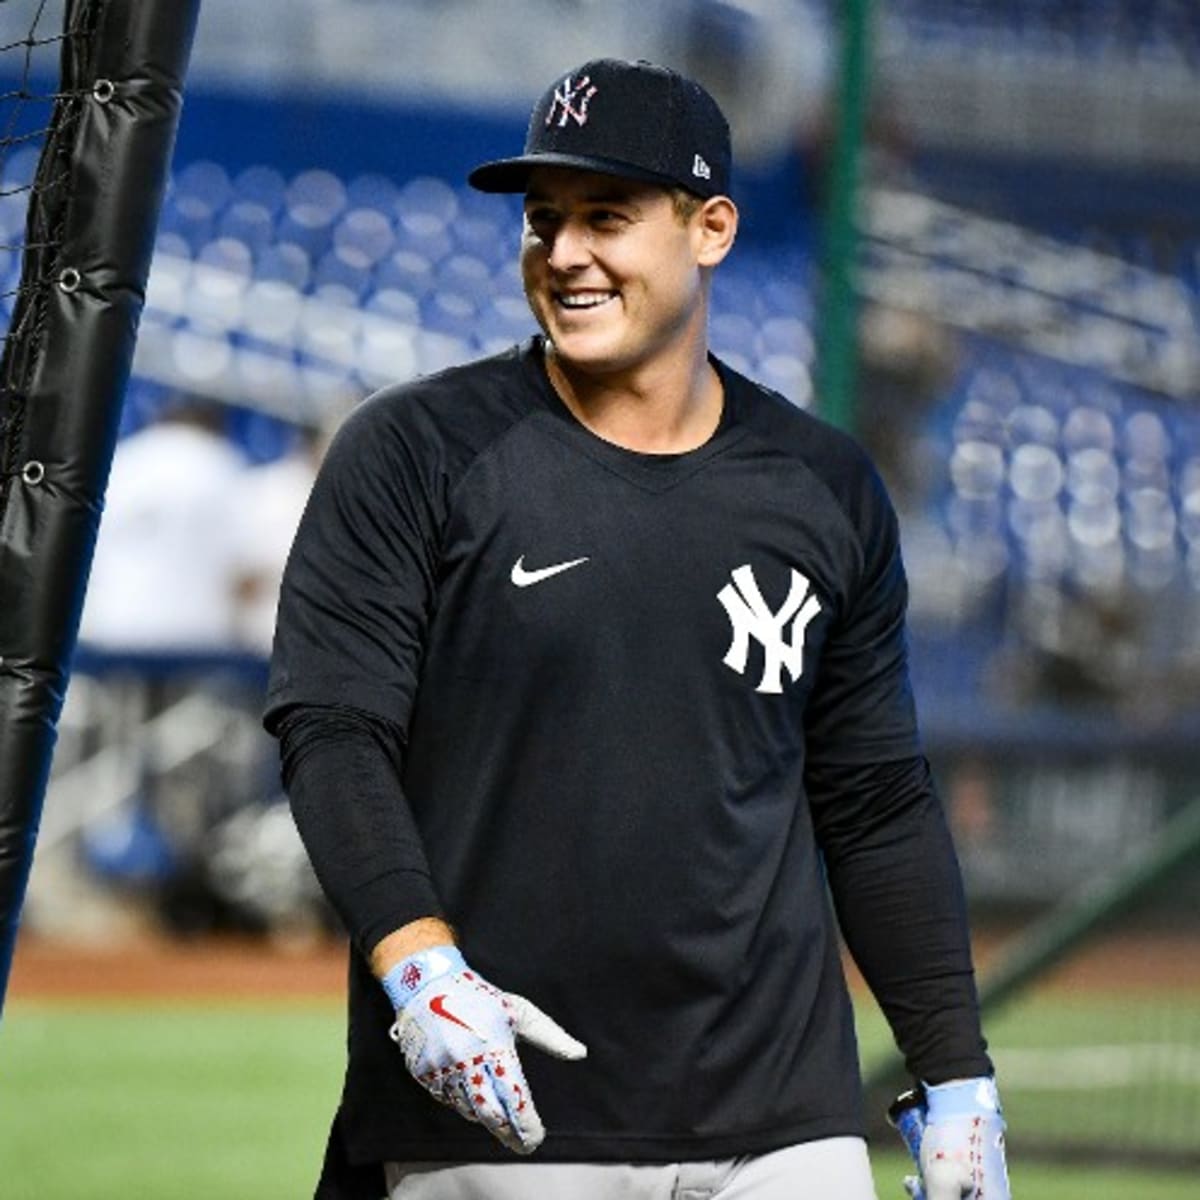 Anthony Rizzo homers in Yankees' debut as Yanks beat Marlins 3-1